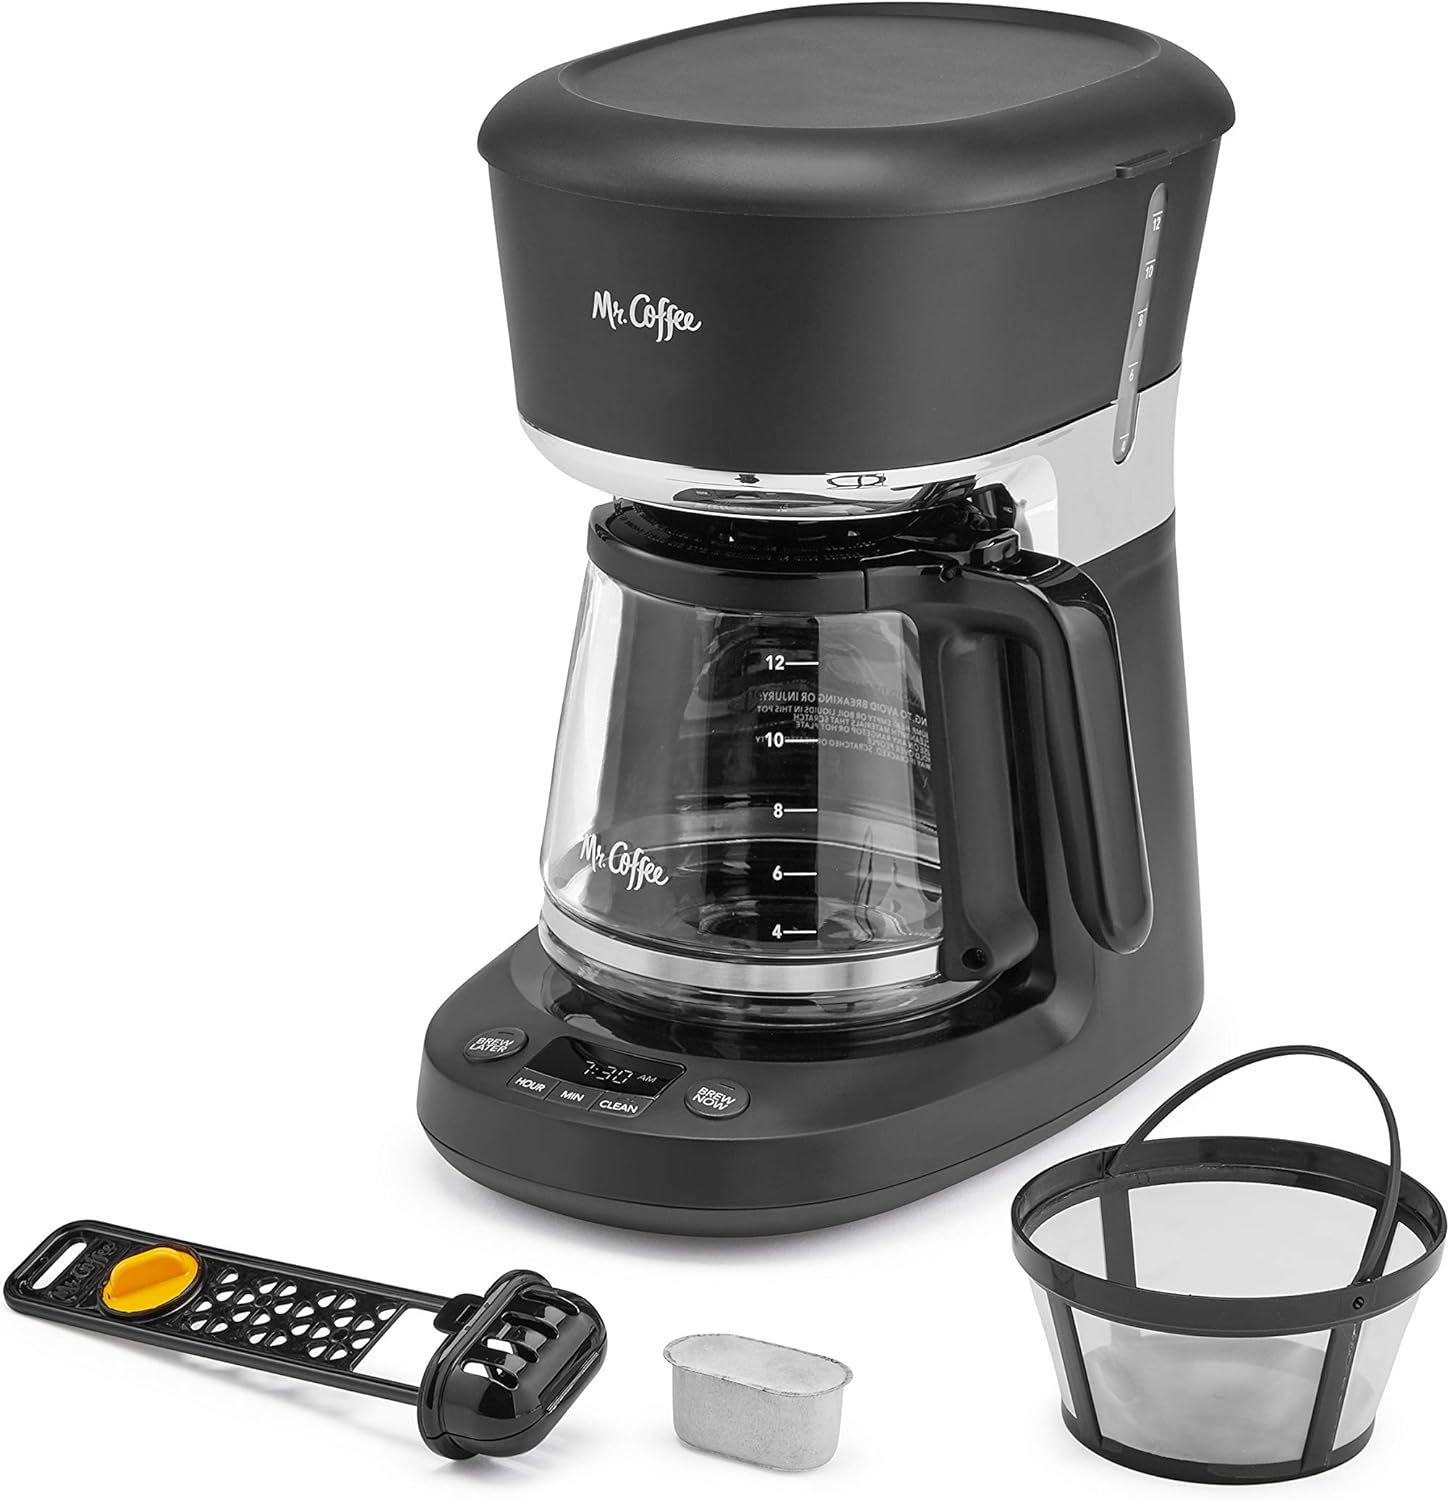 Mr. Coffee 12 Cup Dishwashable Coffee Maker: A Review